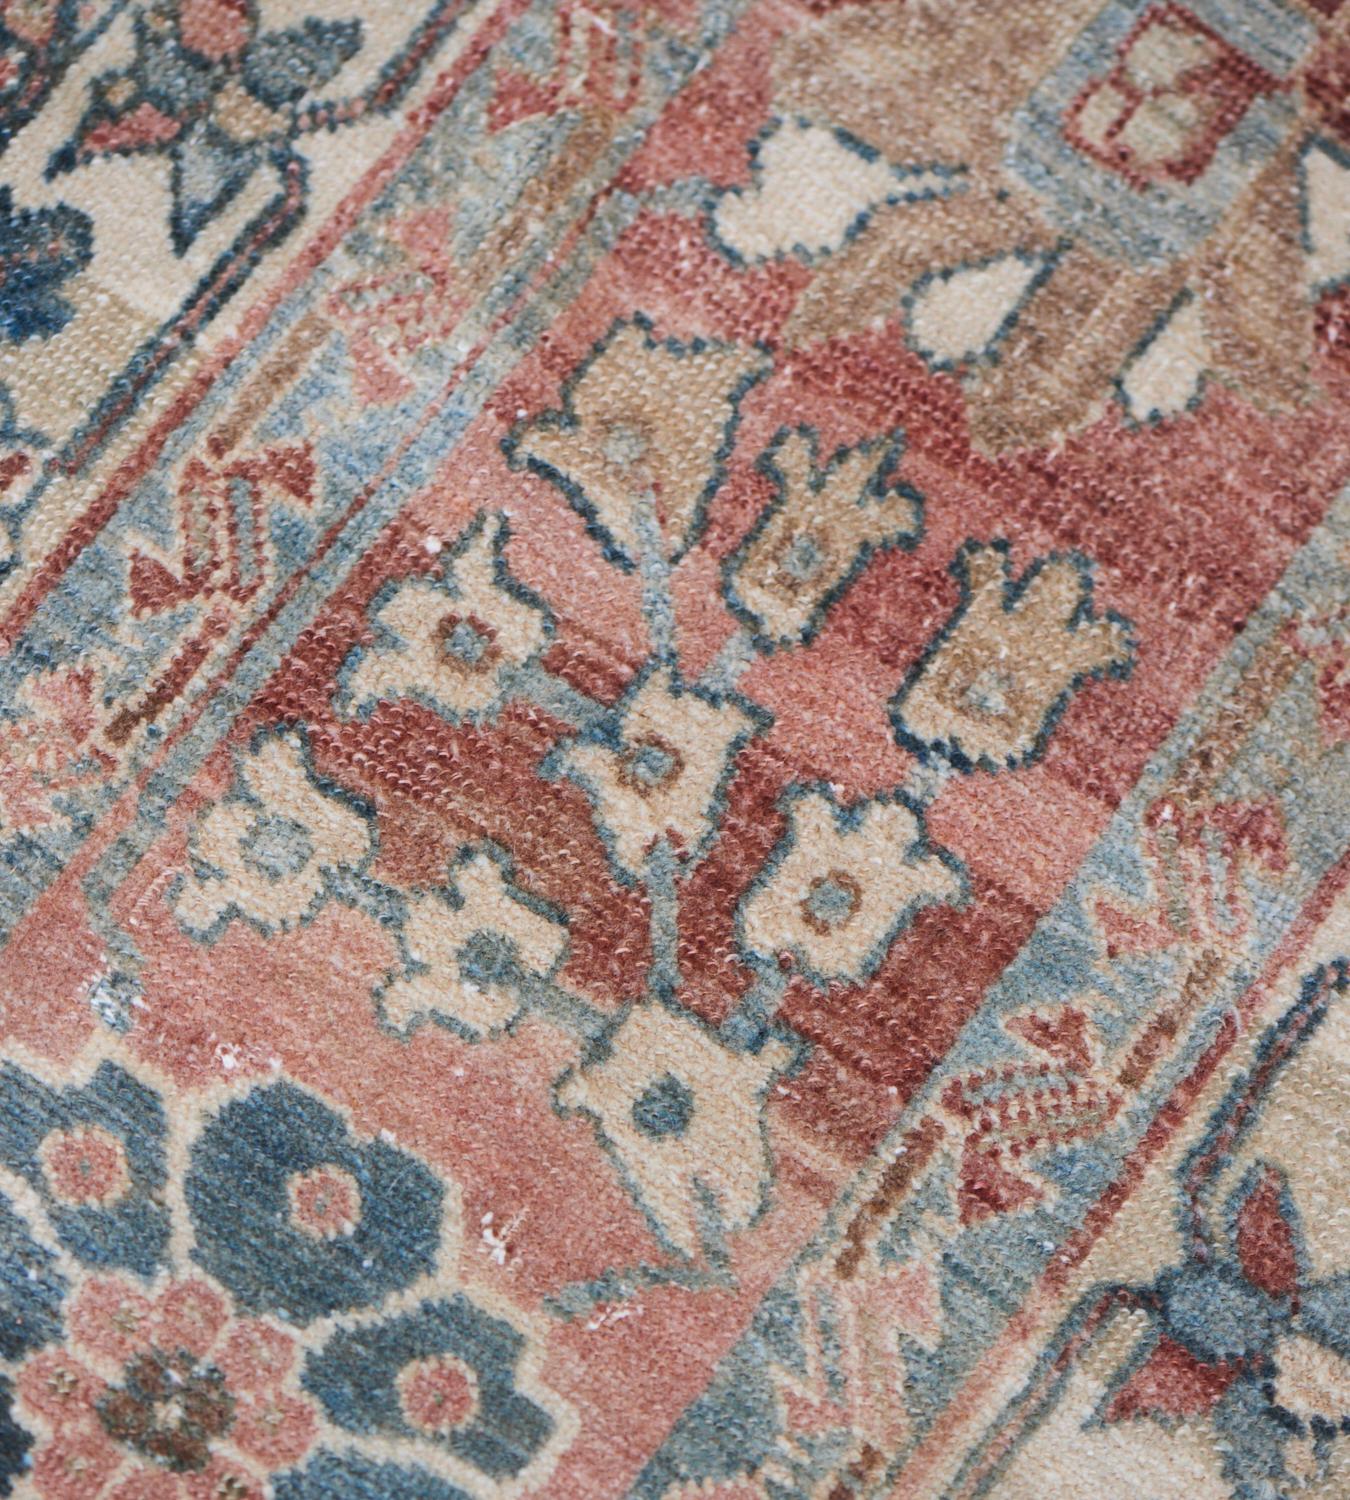 19th Century Hand-Knotted Wool Floral Persian Bakhtiairi Rug 14'2